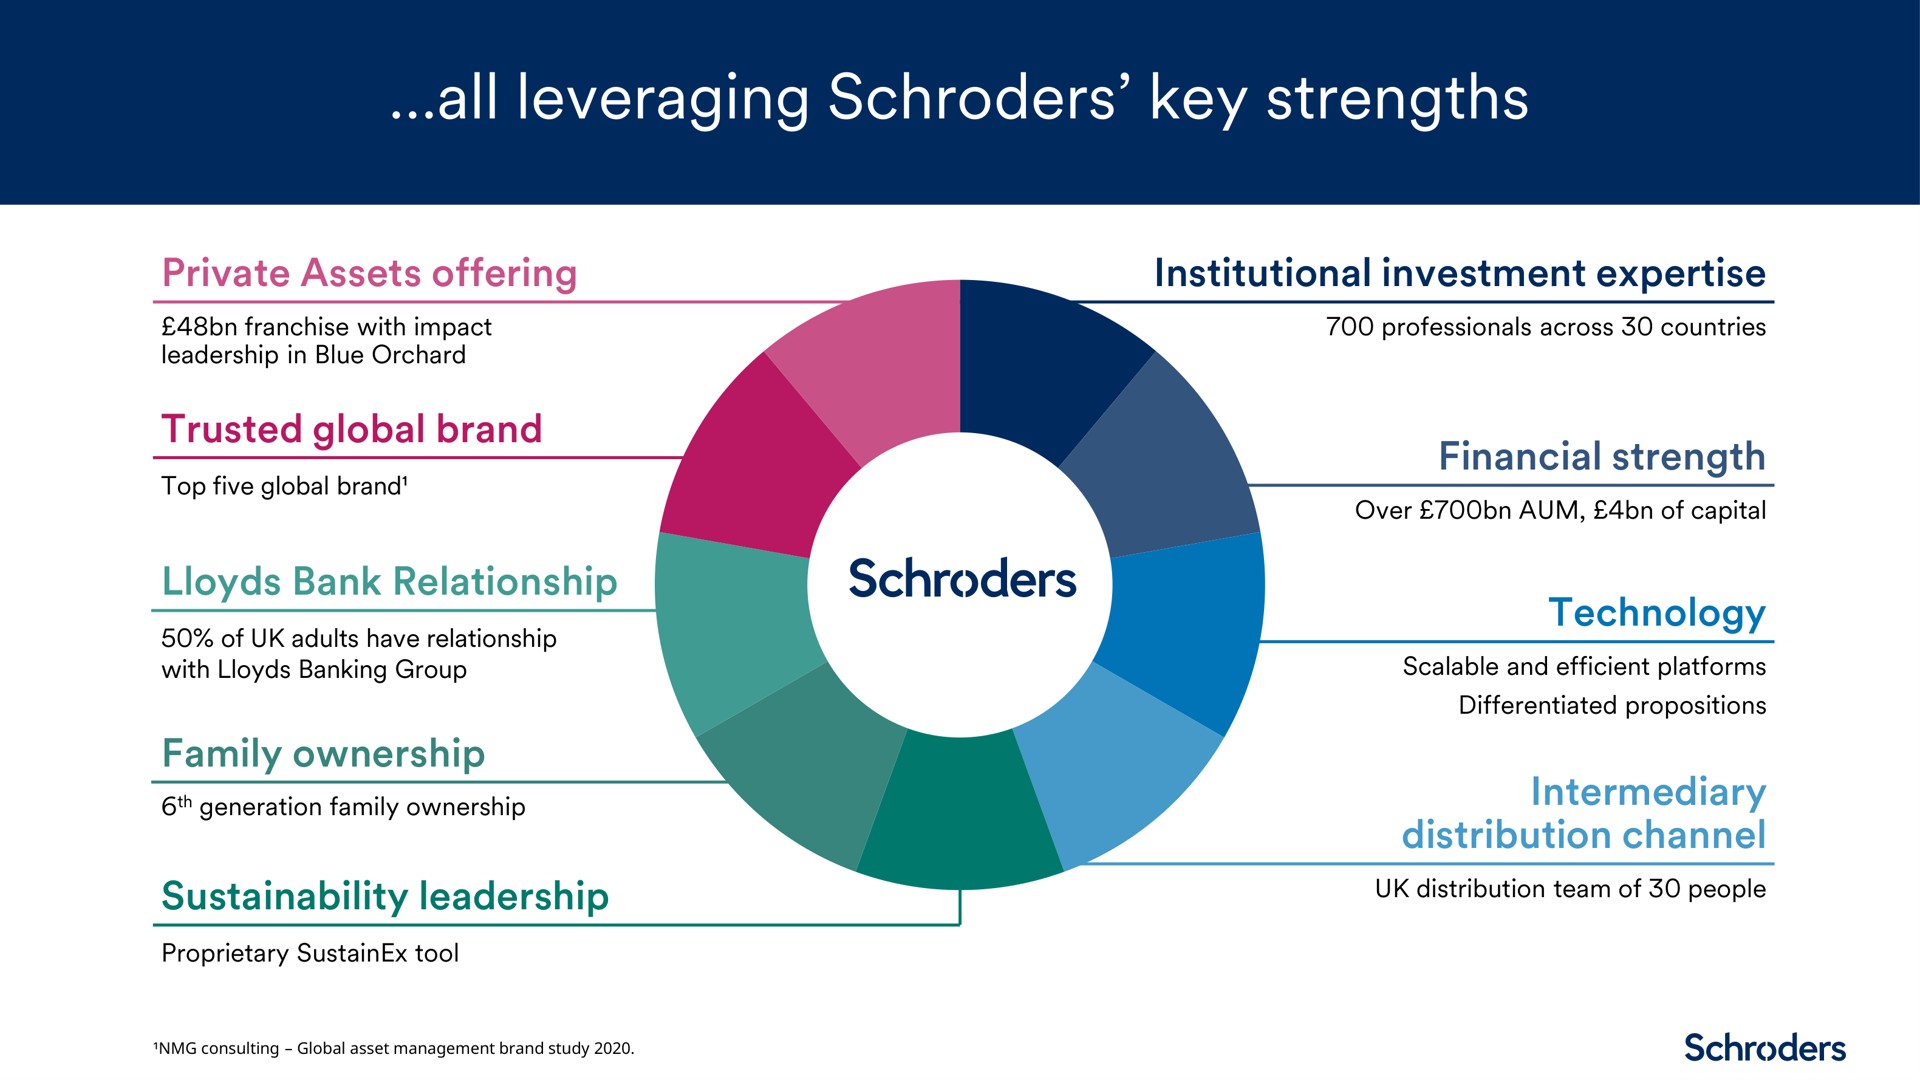 all leveraging key strengths | Schroders